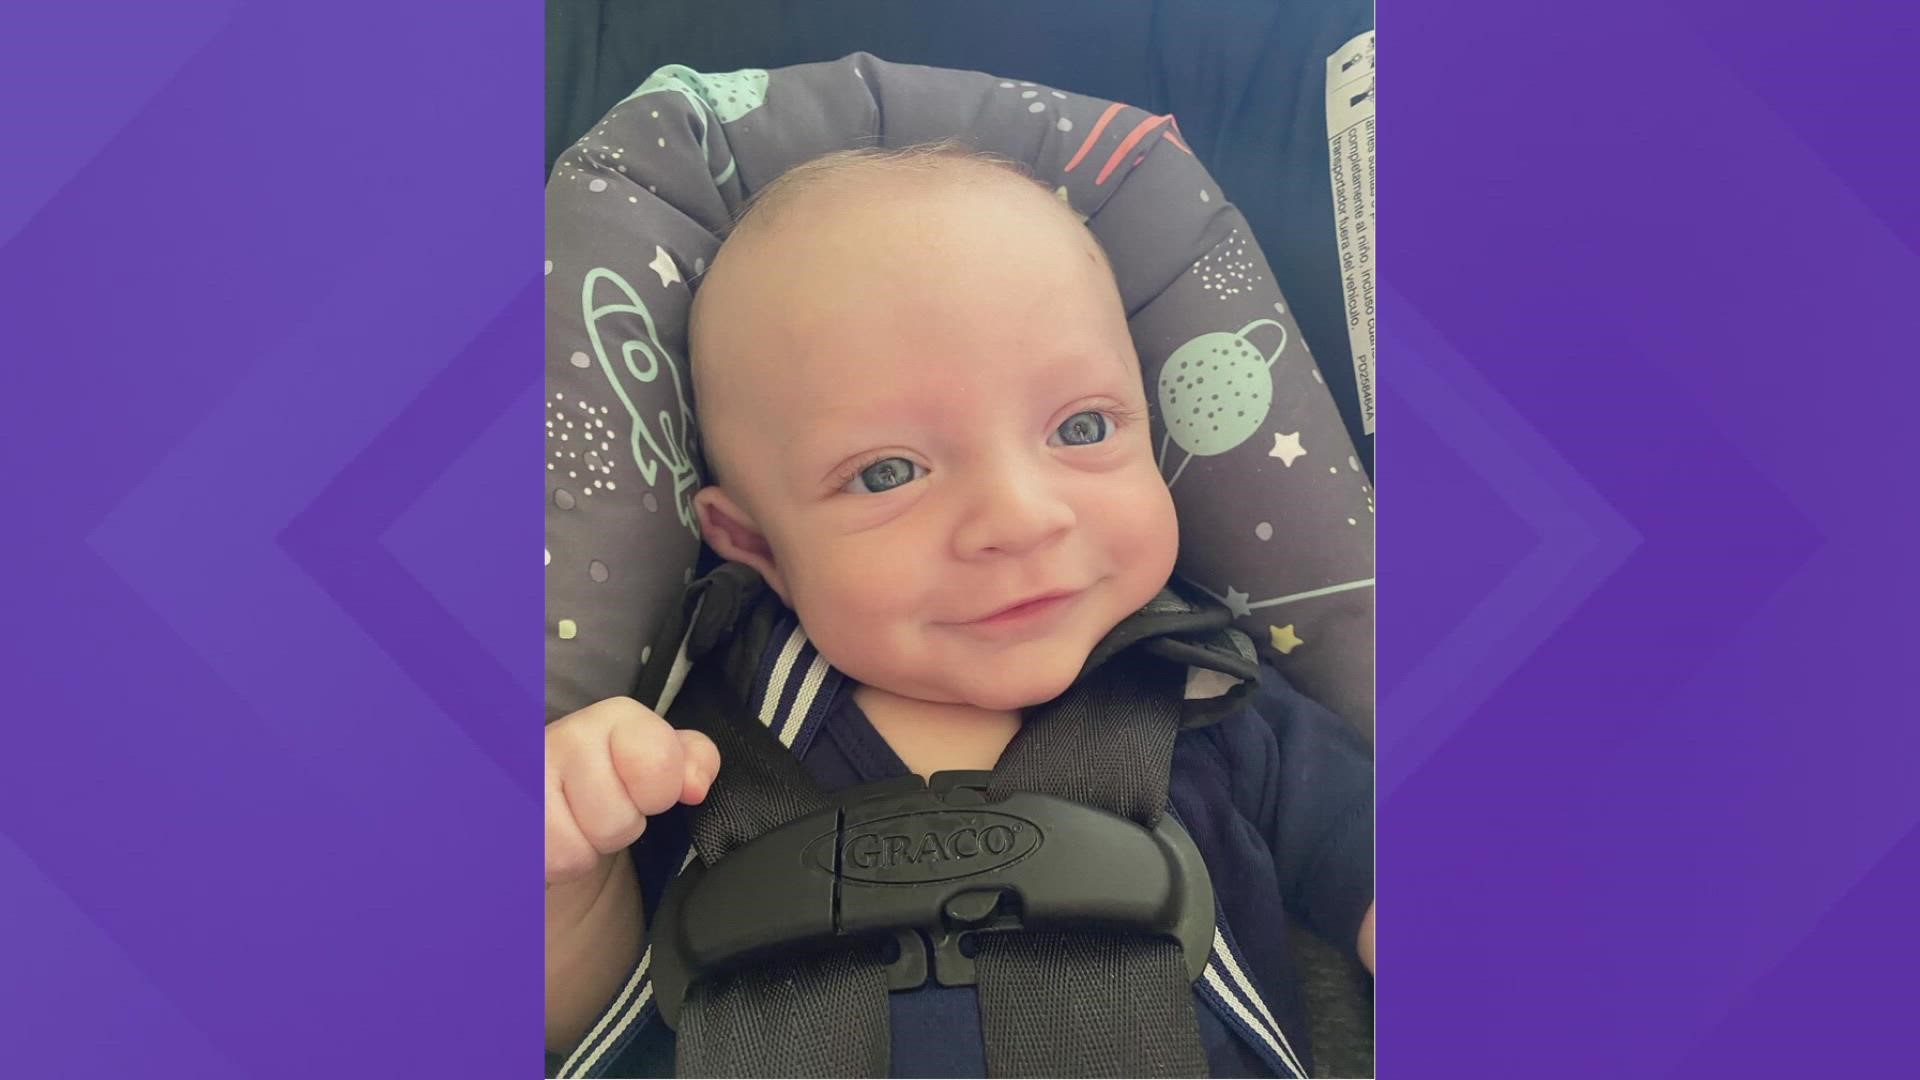 This adorable baby photo sent to us by Emma Morton. She said her baby boy is her miracle baby after three years of infertility.